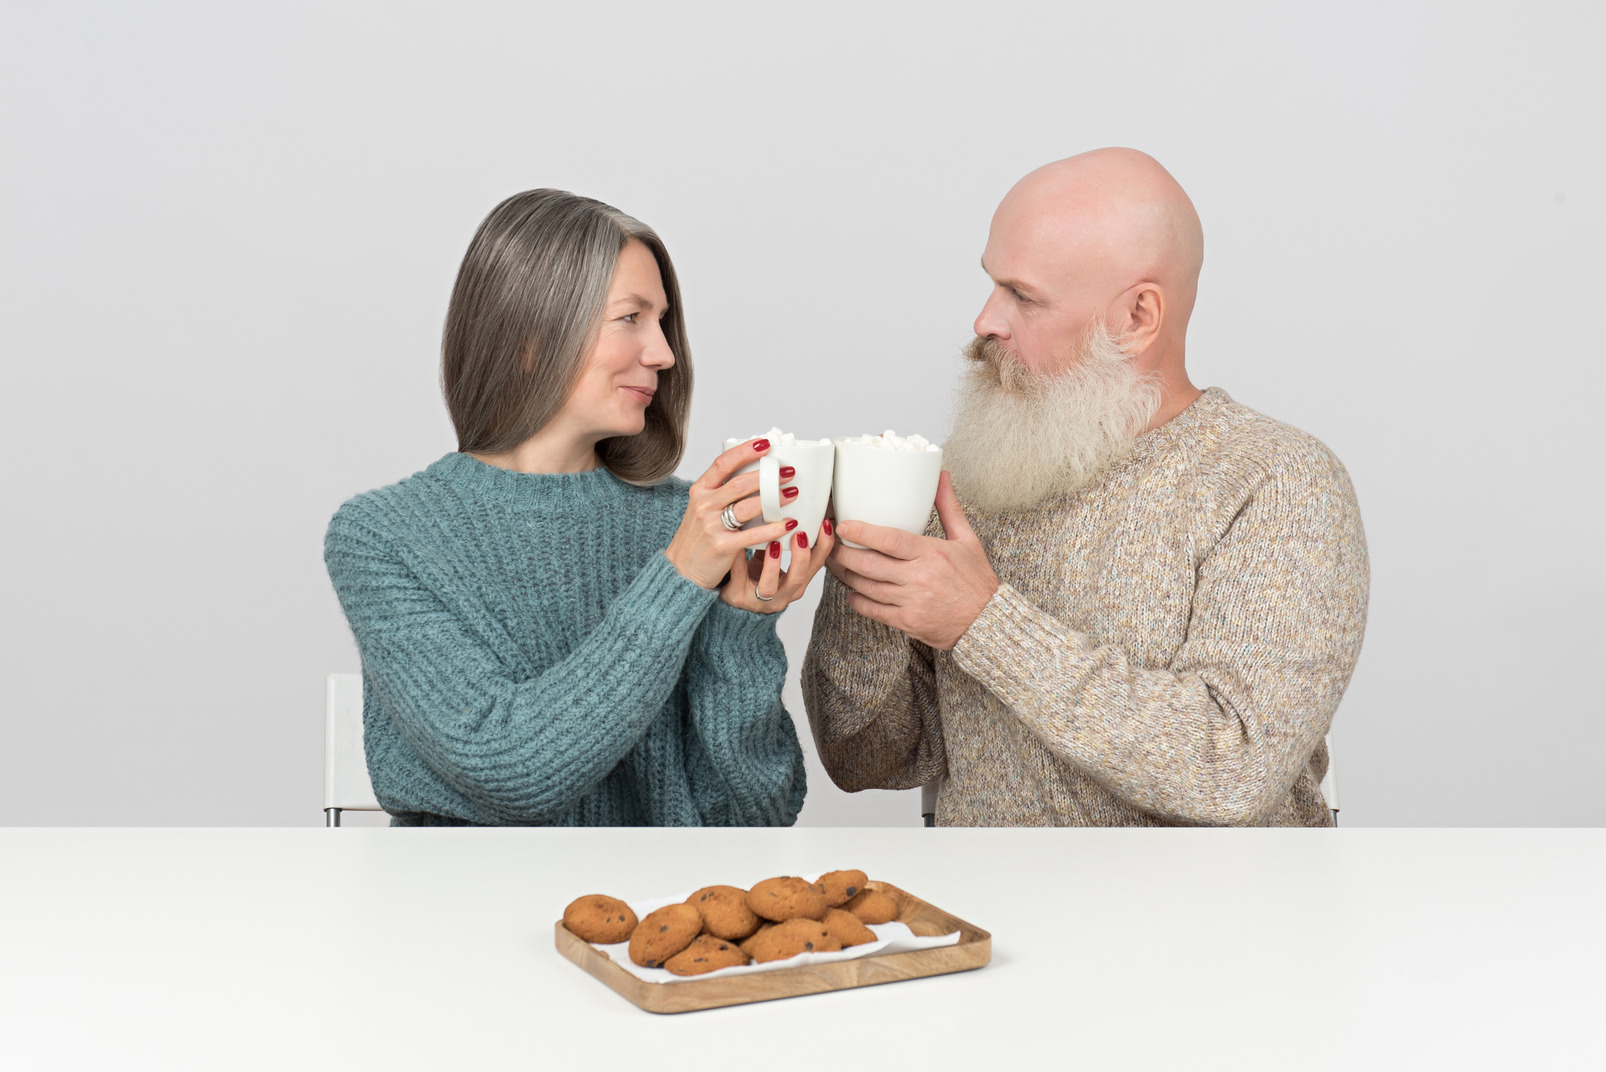 Aged couple saying cheers with coffee cups